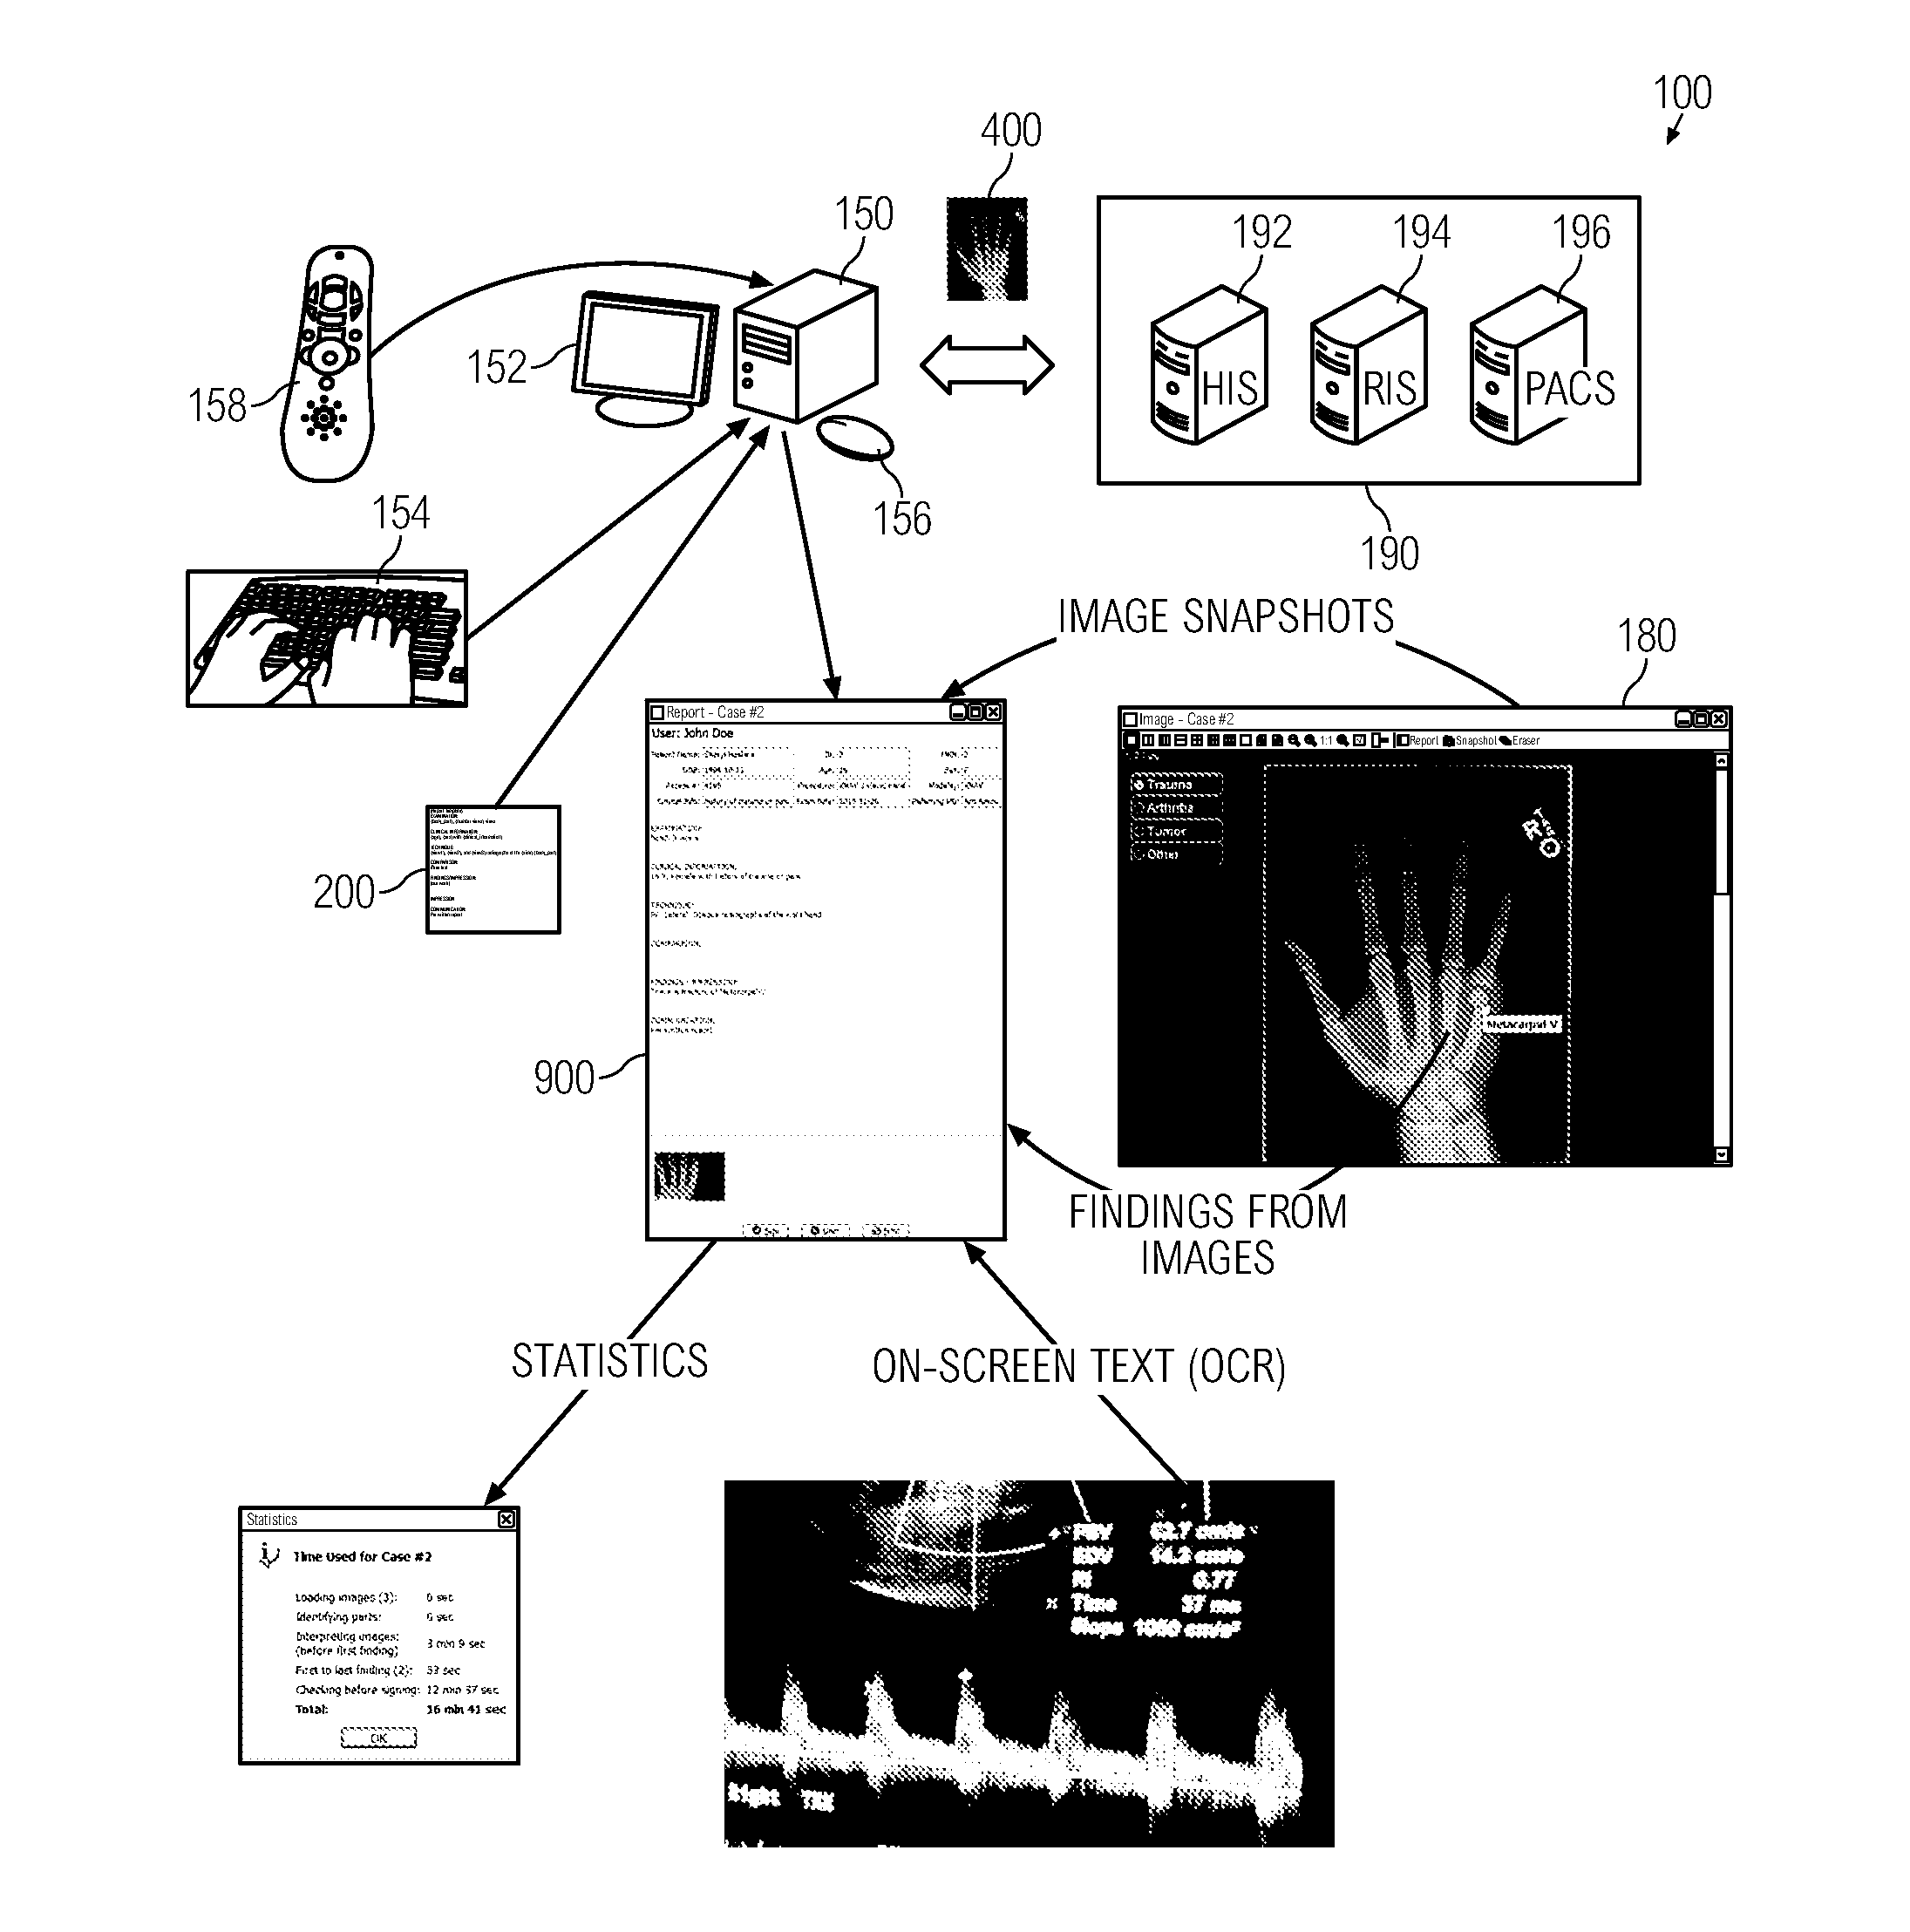 Method for creating a report from radiological images using electronic report templates